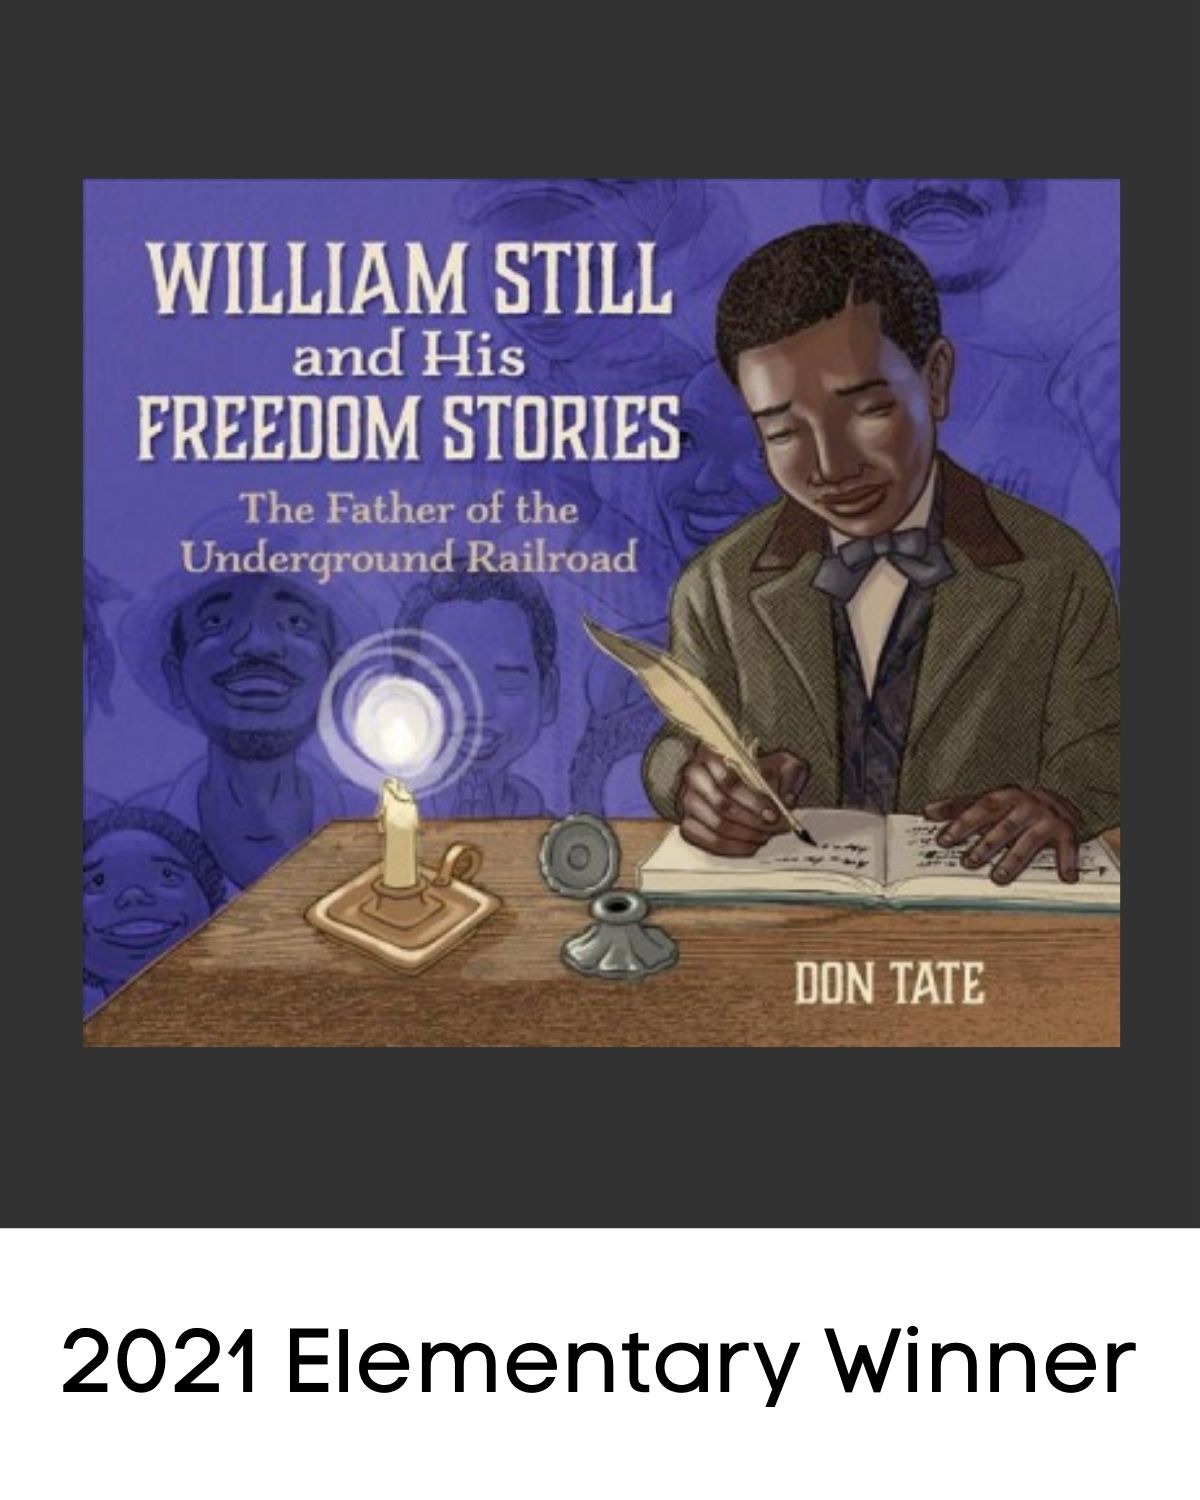 William Still and His Freedom Stories: The Father of the Underground Railroad book cover